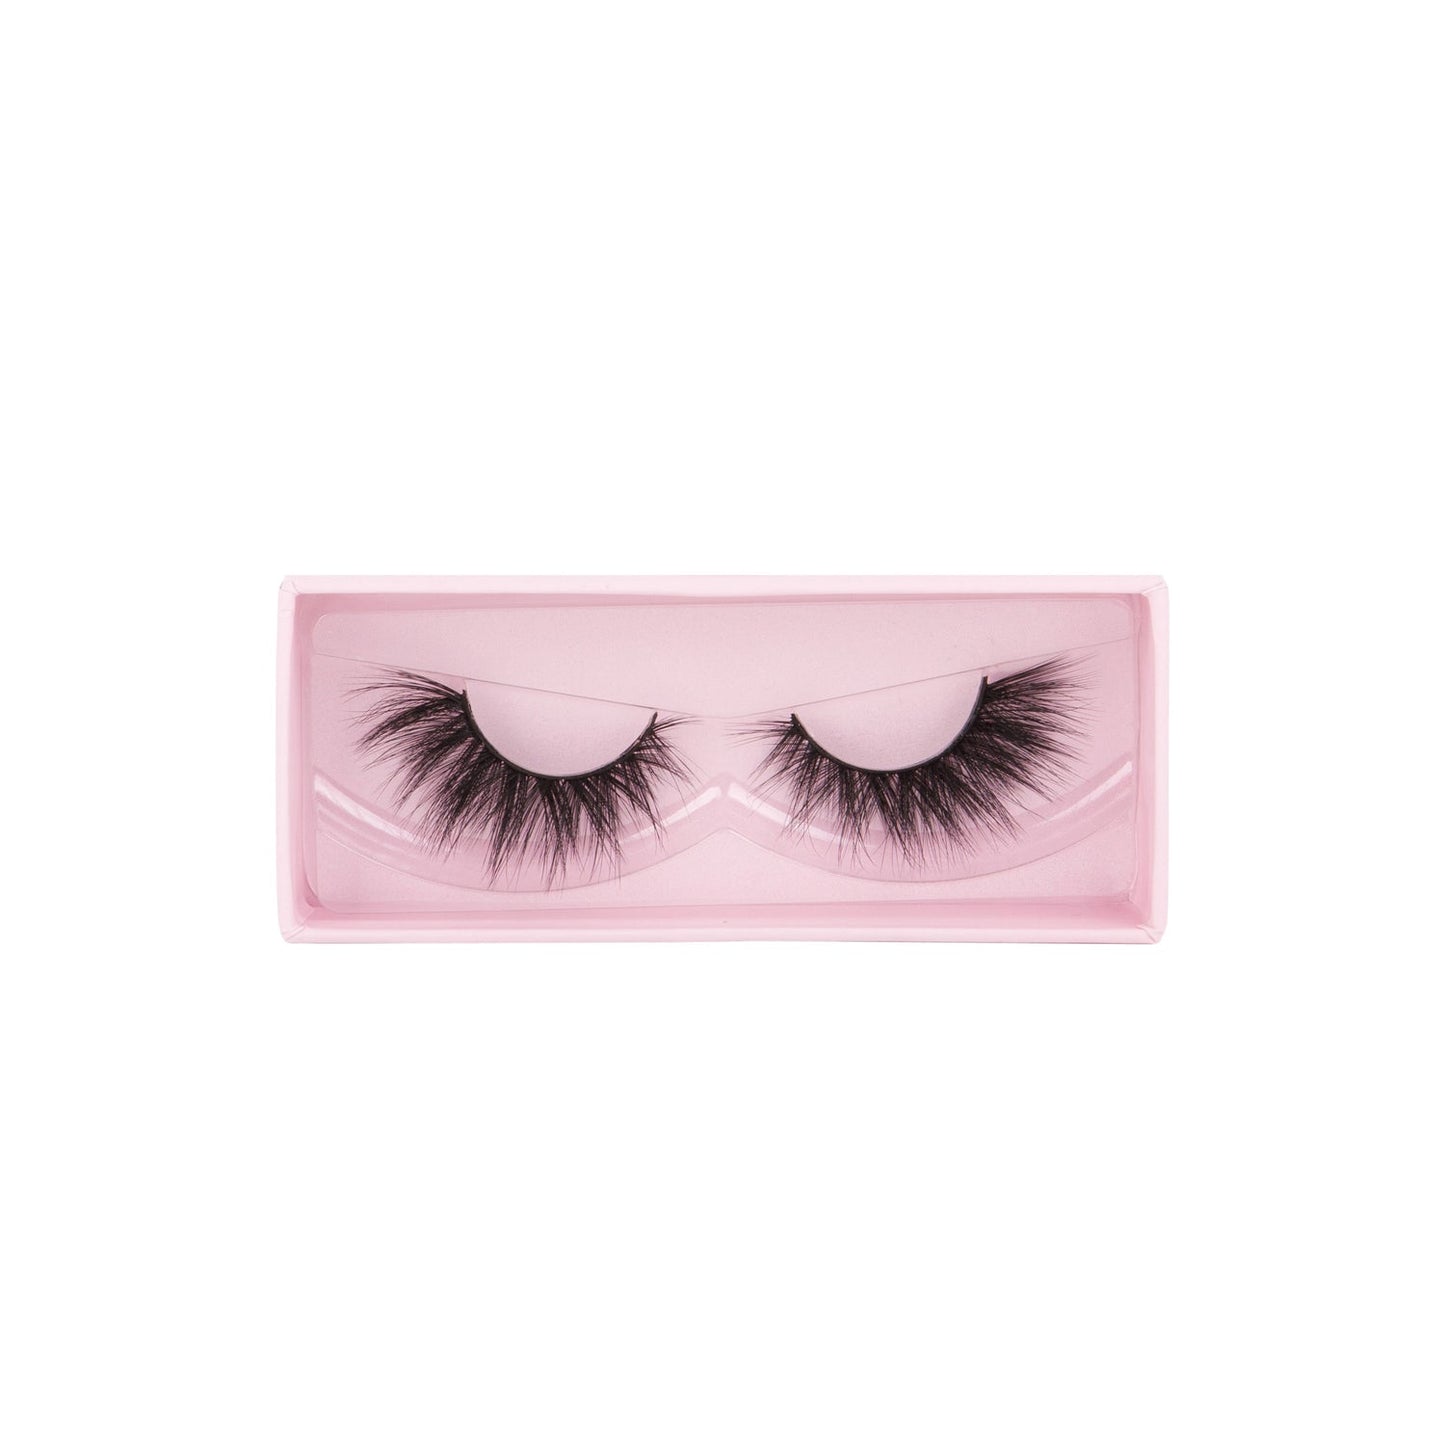 Spoiled - 3D Faux Silk Lashes